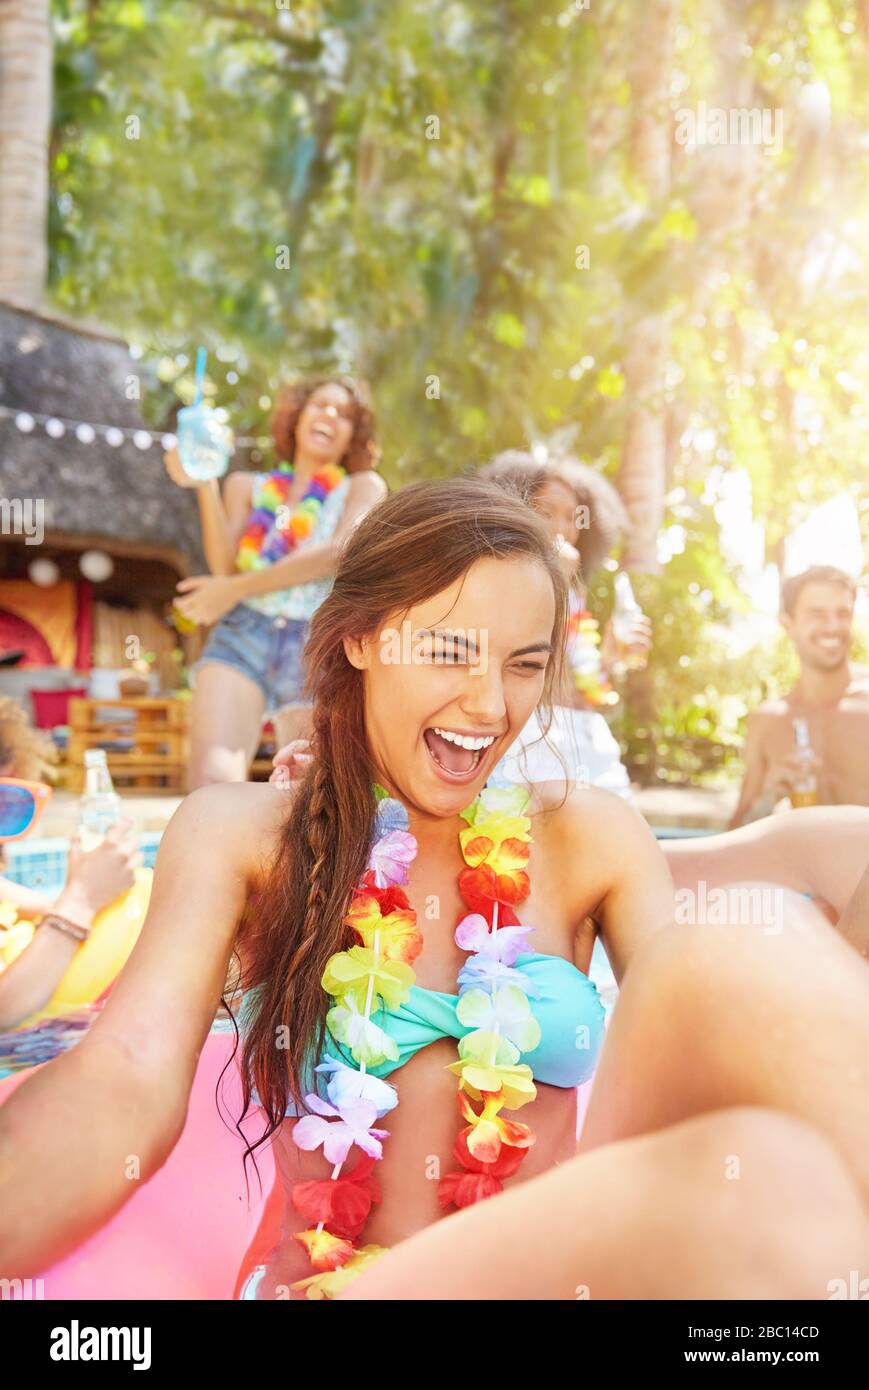 Enthusiastic, laughing young woman wearing lei in summer swimming pool Stock Photo